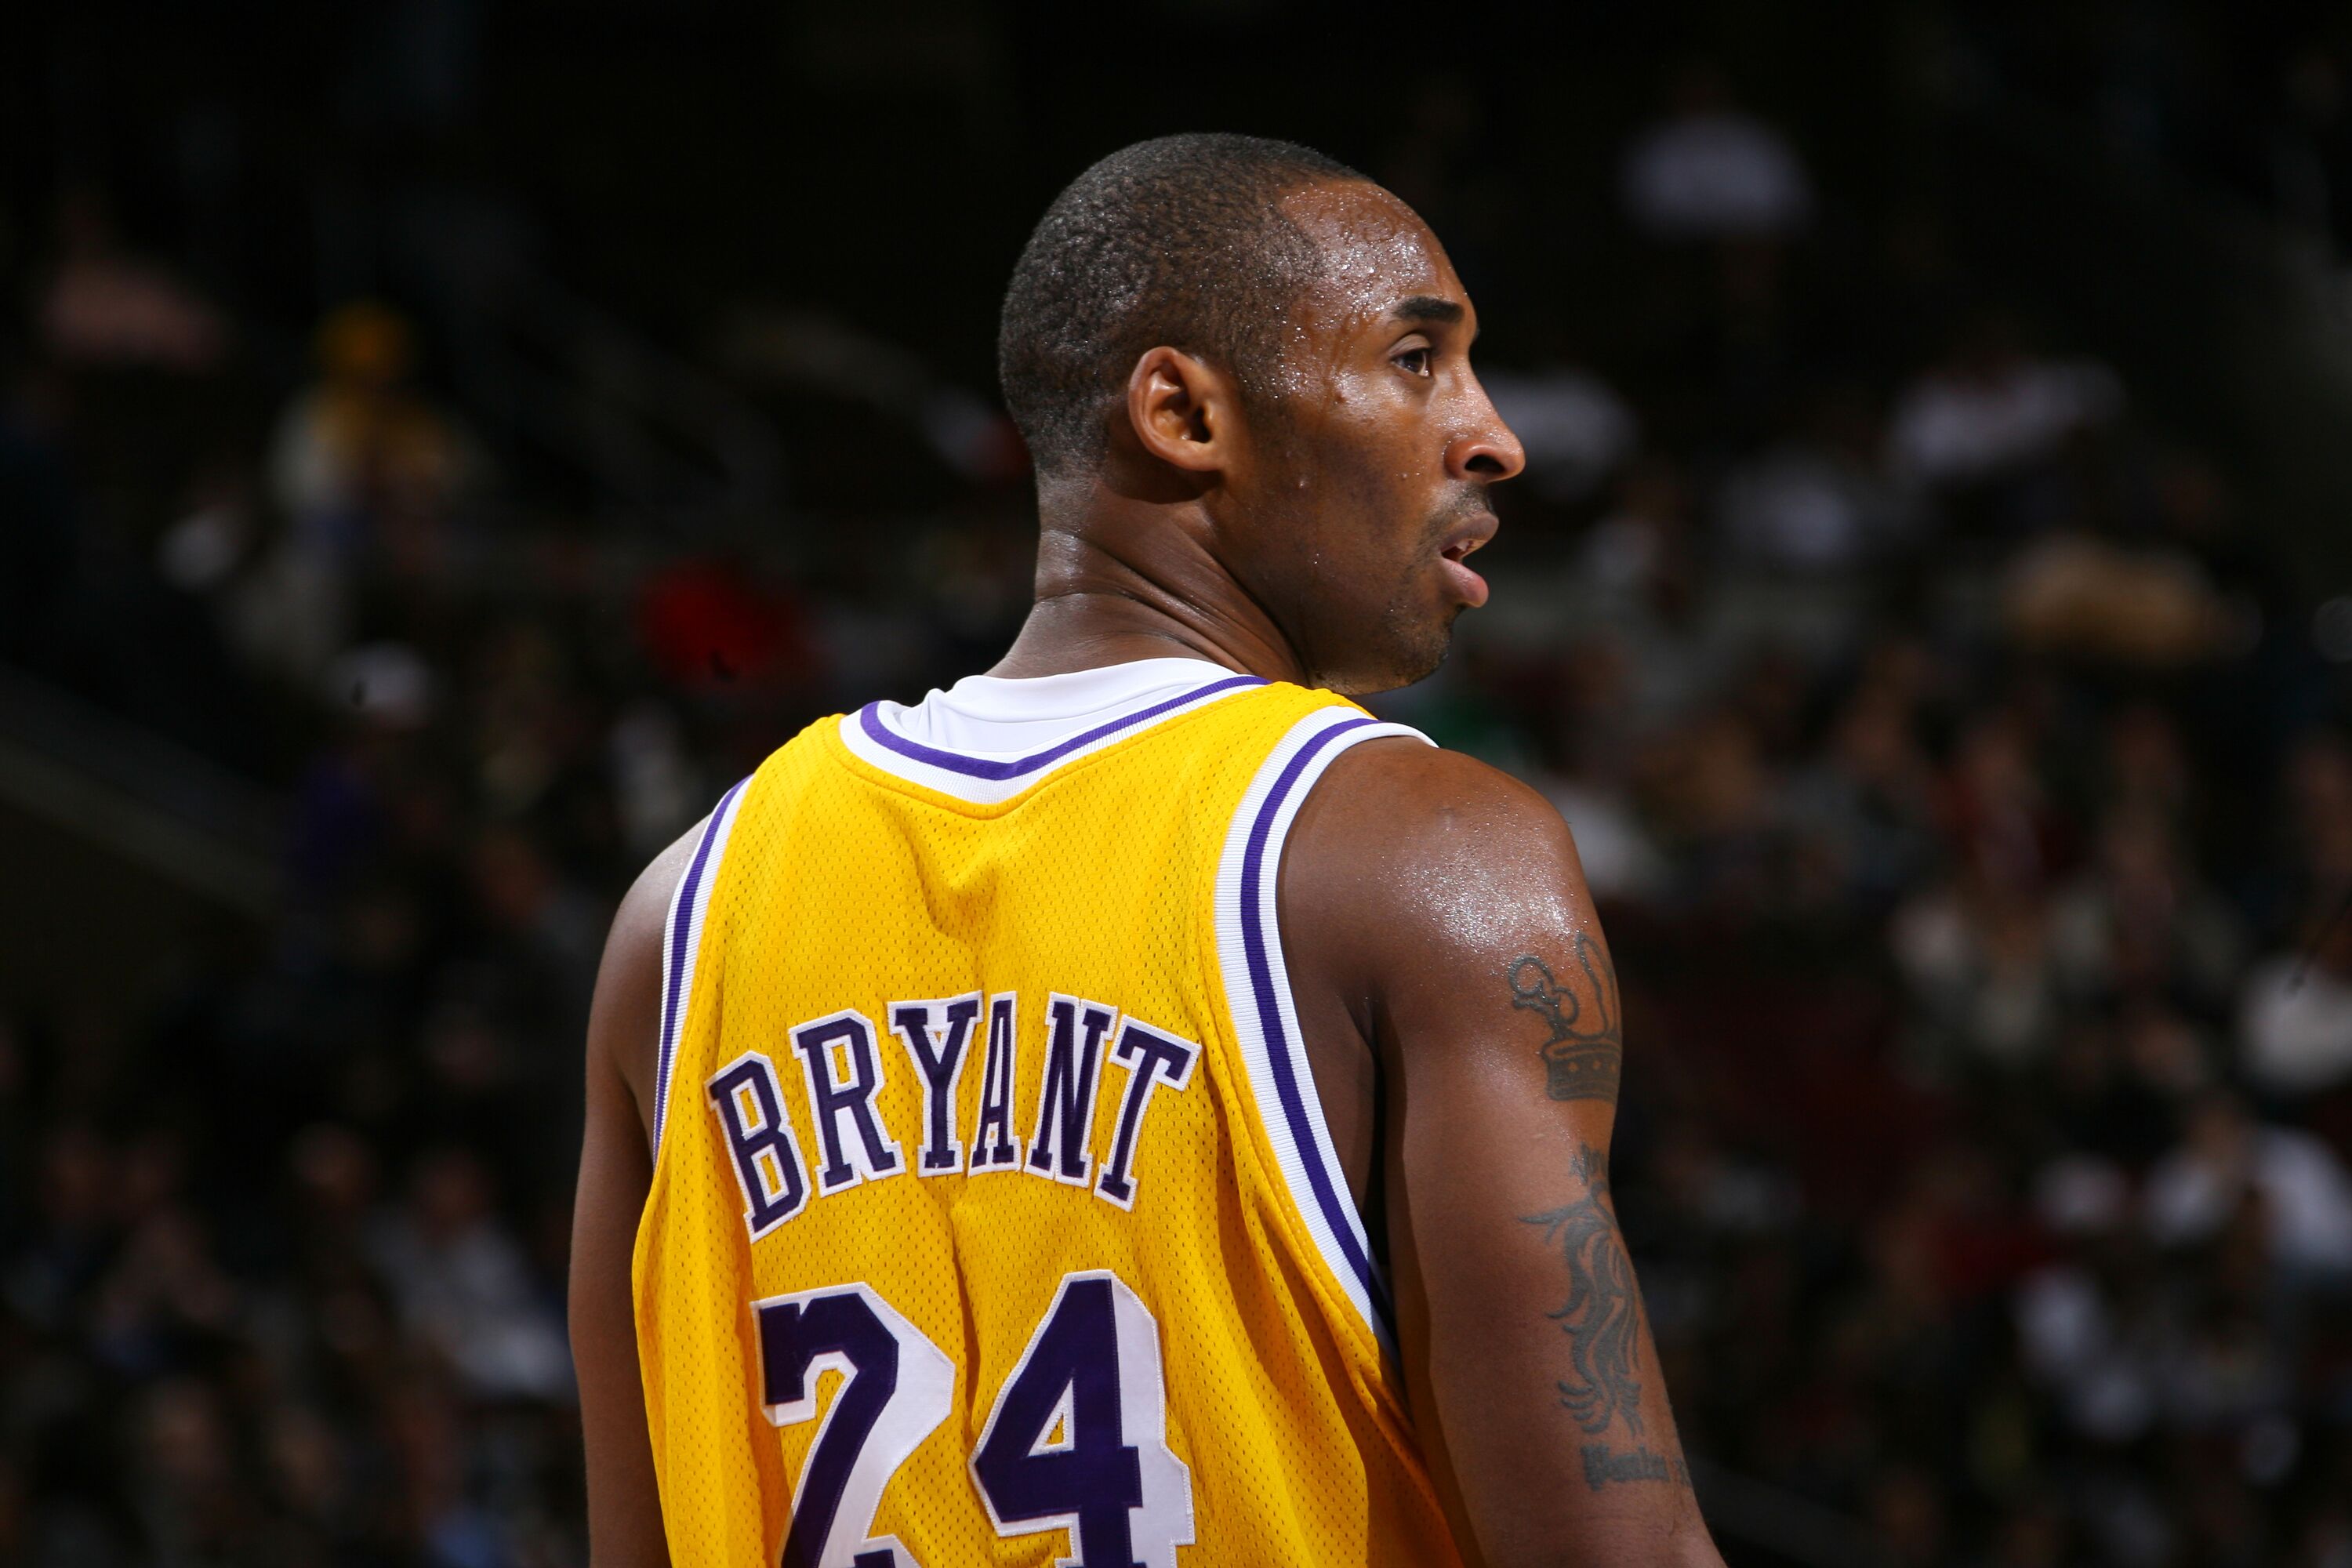 Kobe Bryant #24 of the Los Angeles Lakers looks on during the game against the Philadelphia 76ers at the Wachovia Center December 21, 2007 in Philadelphia, Pennsylvania | Photo: Getty Images